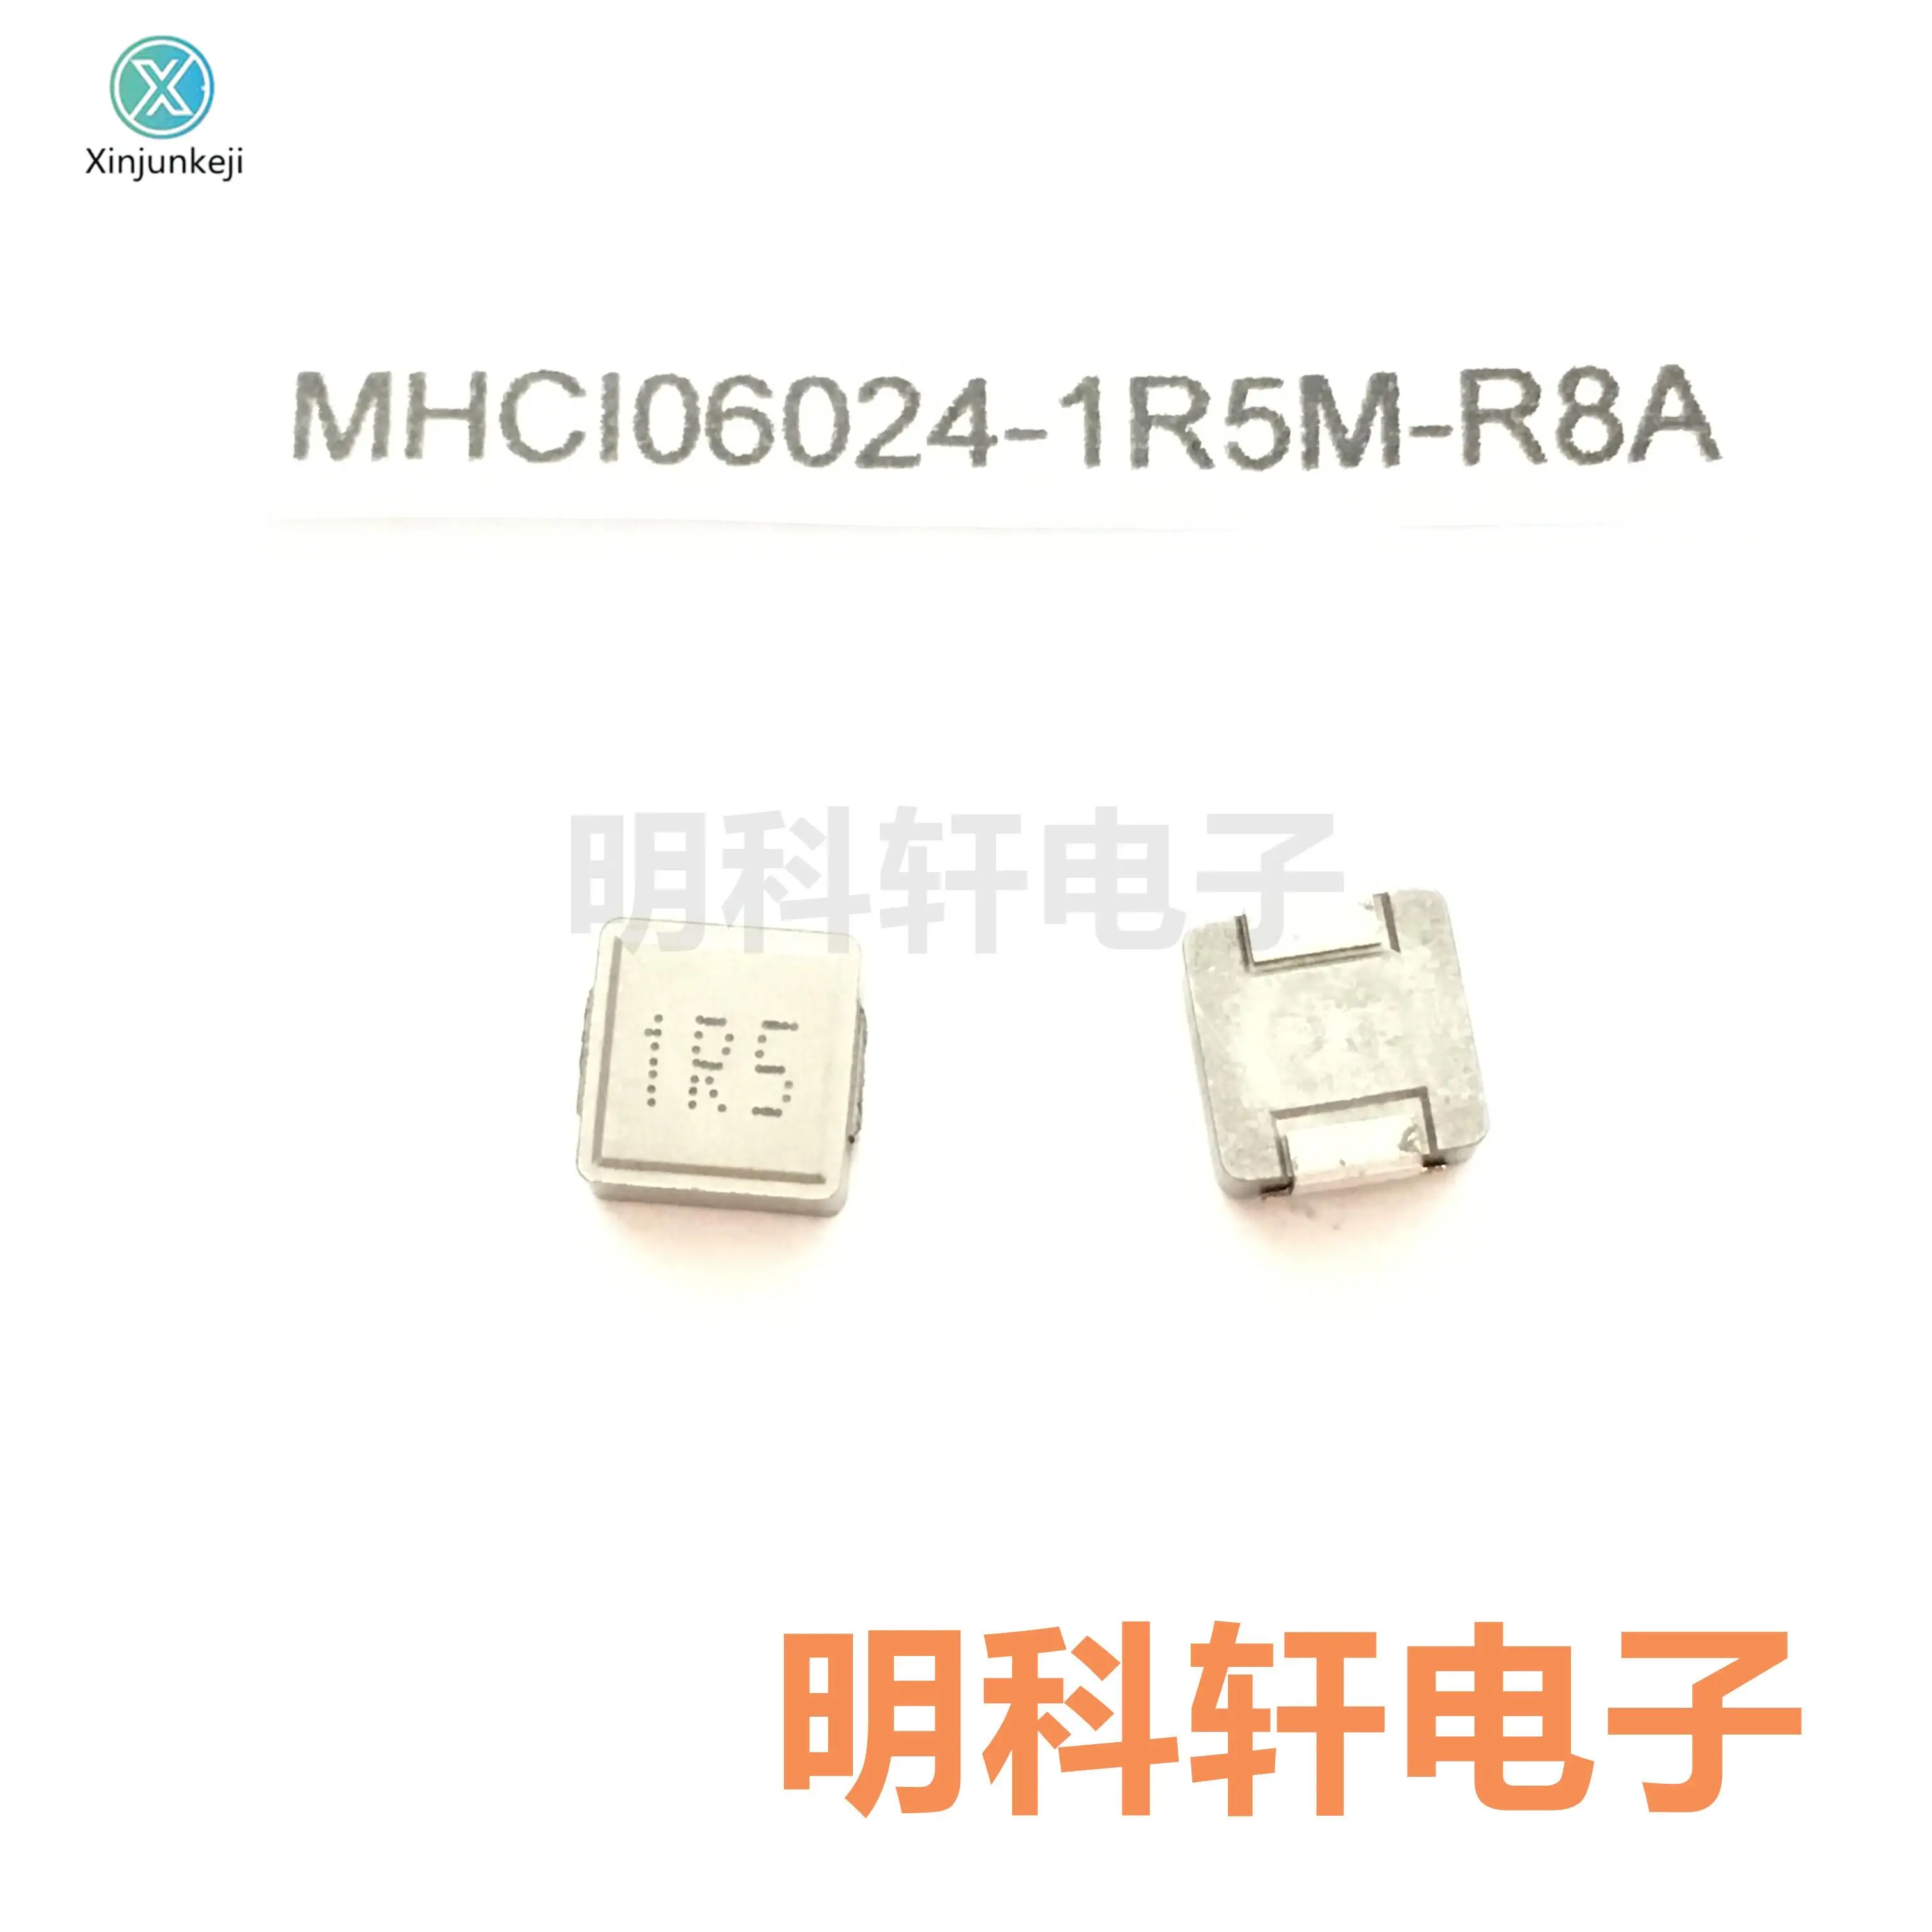 

10pcs orginal new MHCI06024-1R5M-R8A SMD integrated inductor 1.5UH